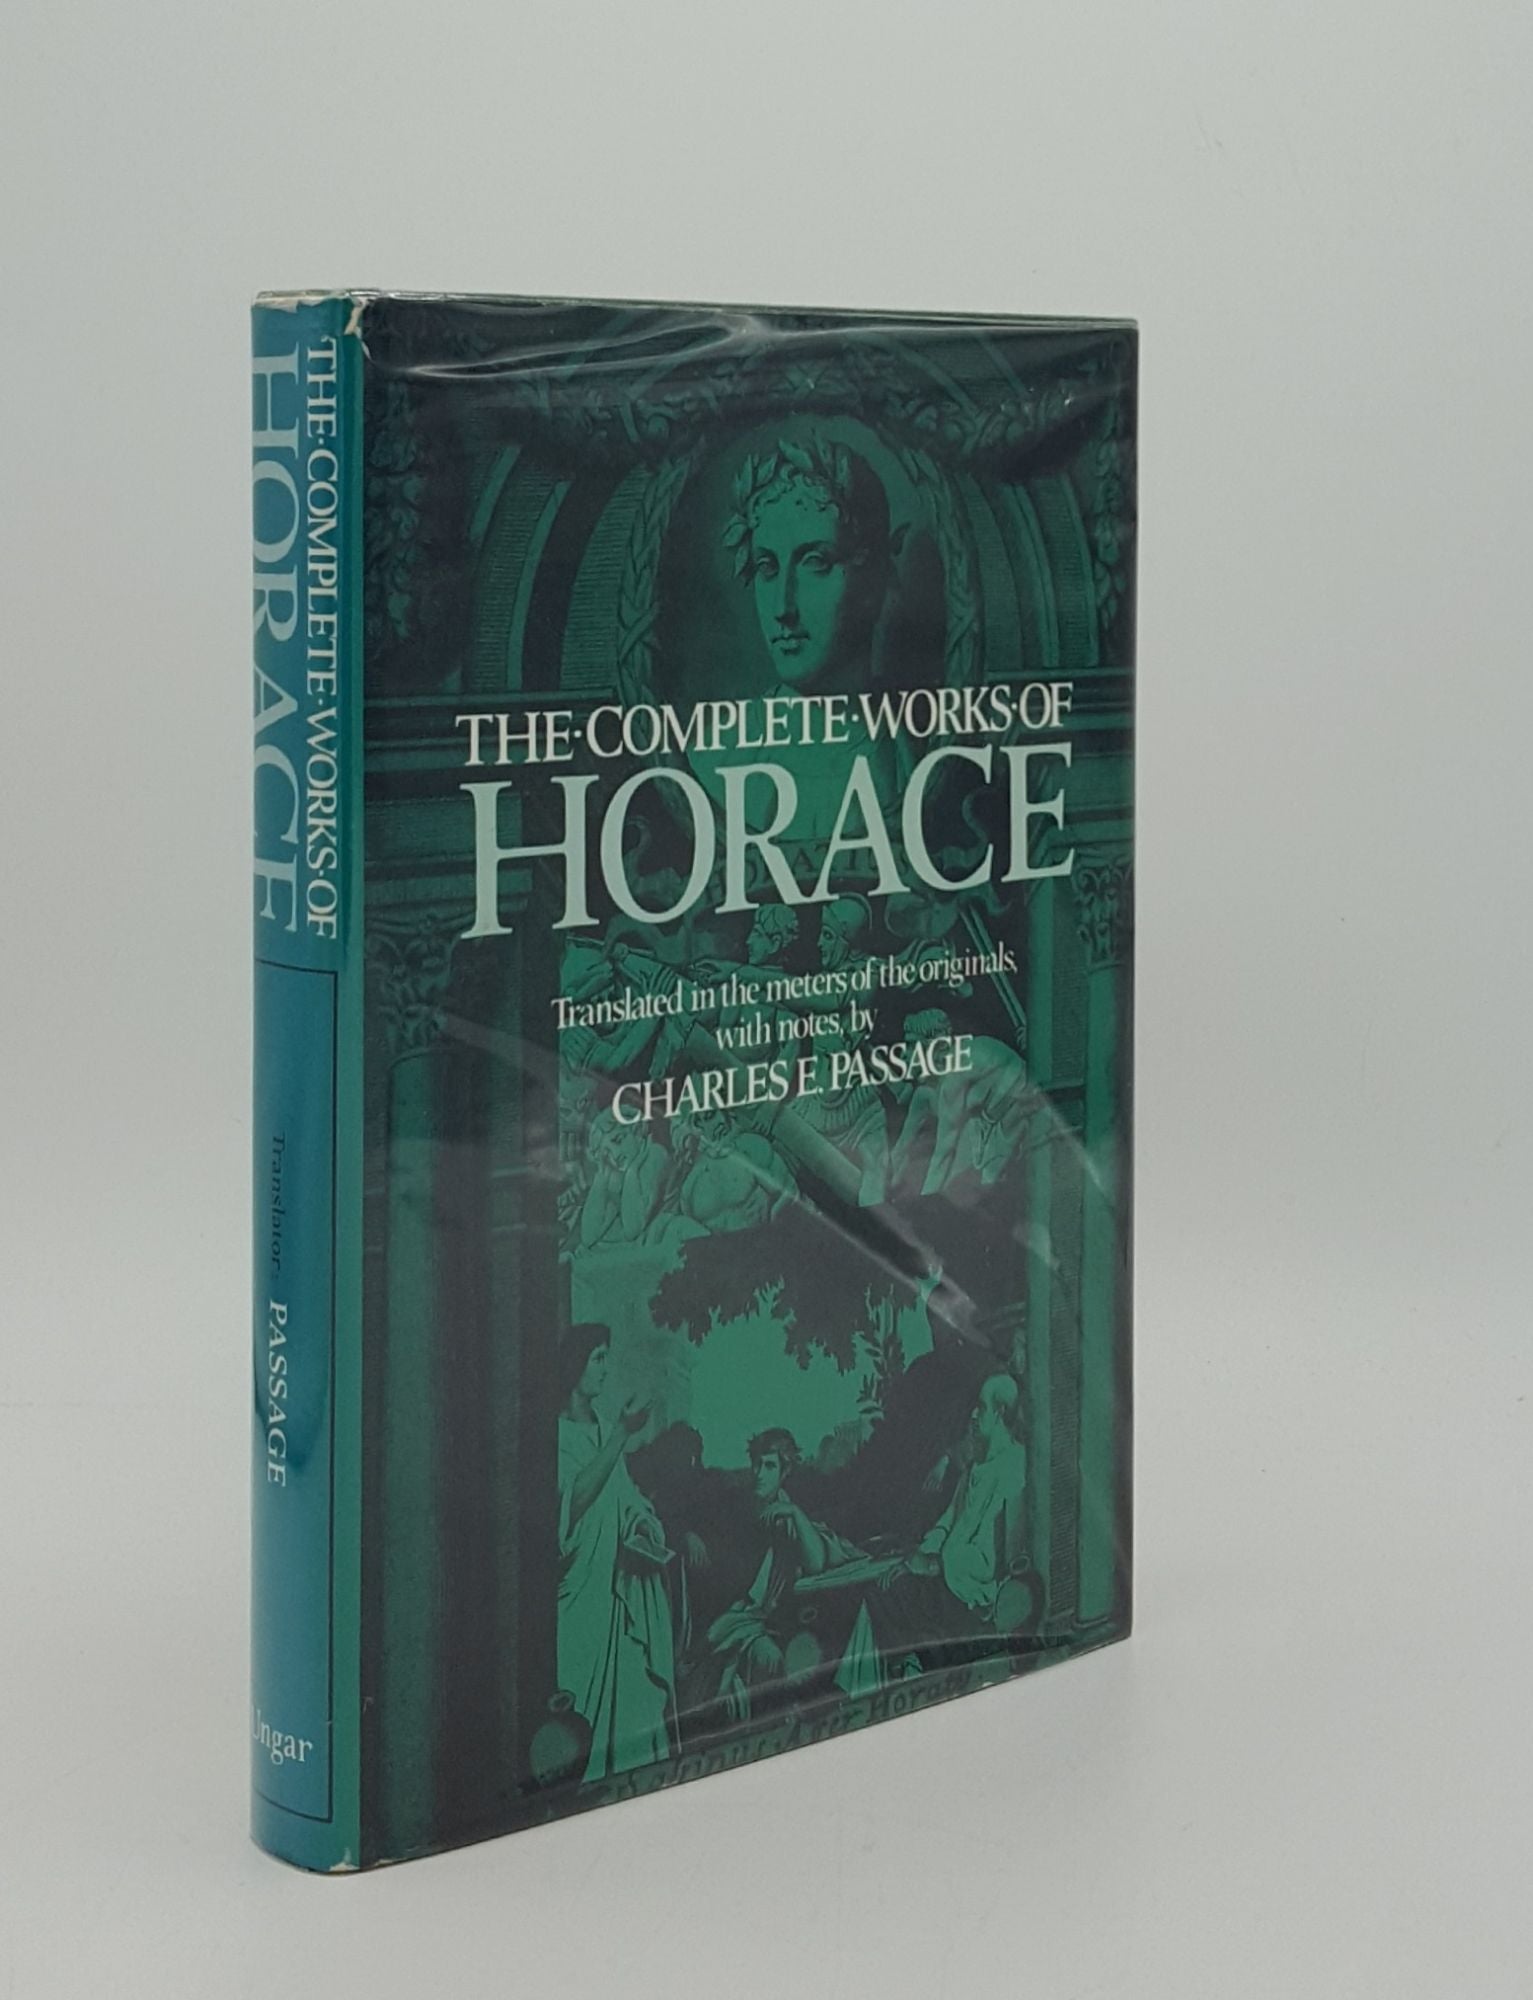 HORACE, PASSAGE Charles E. - The Complete Works of Horace (Quintus Horatius Flaccus) Translated in the Meters of the Original with Notes